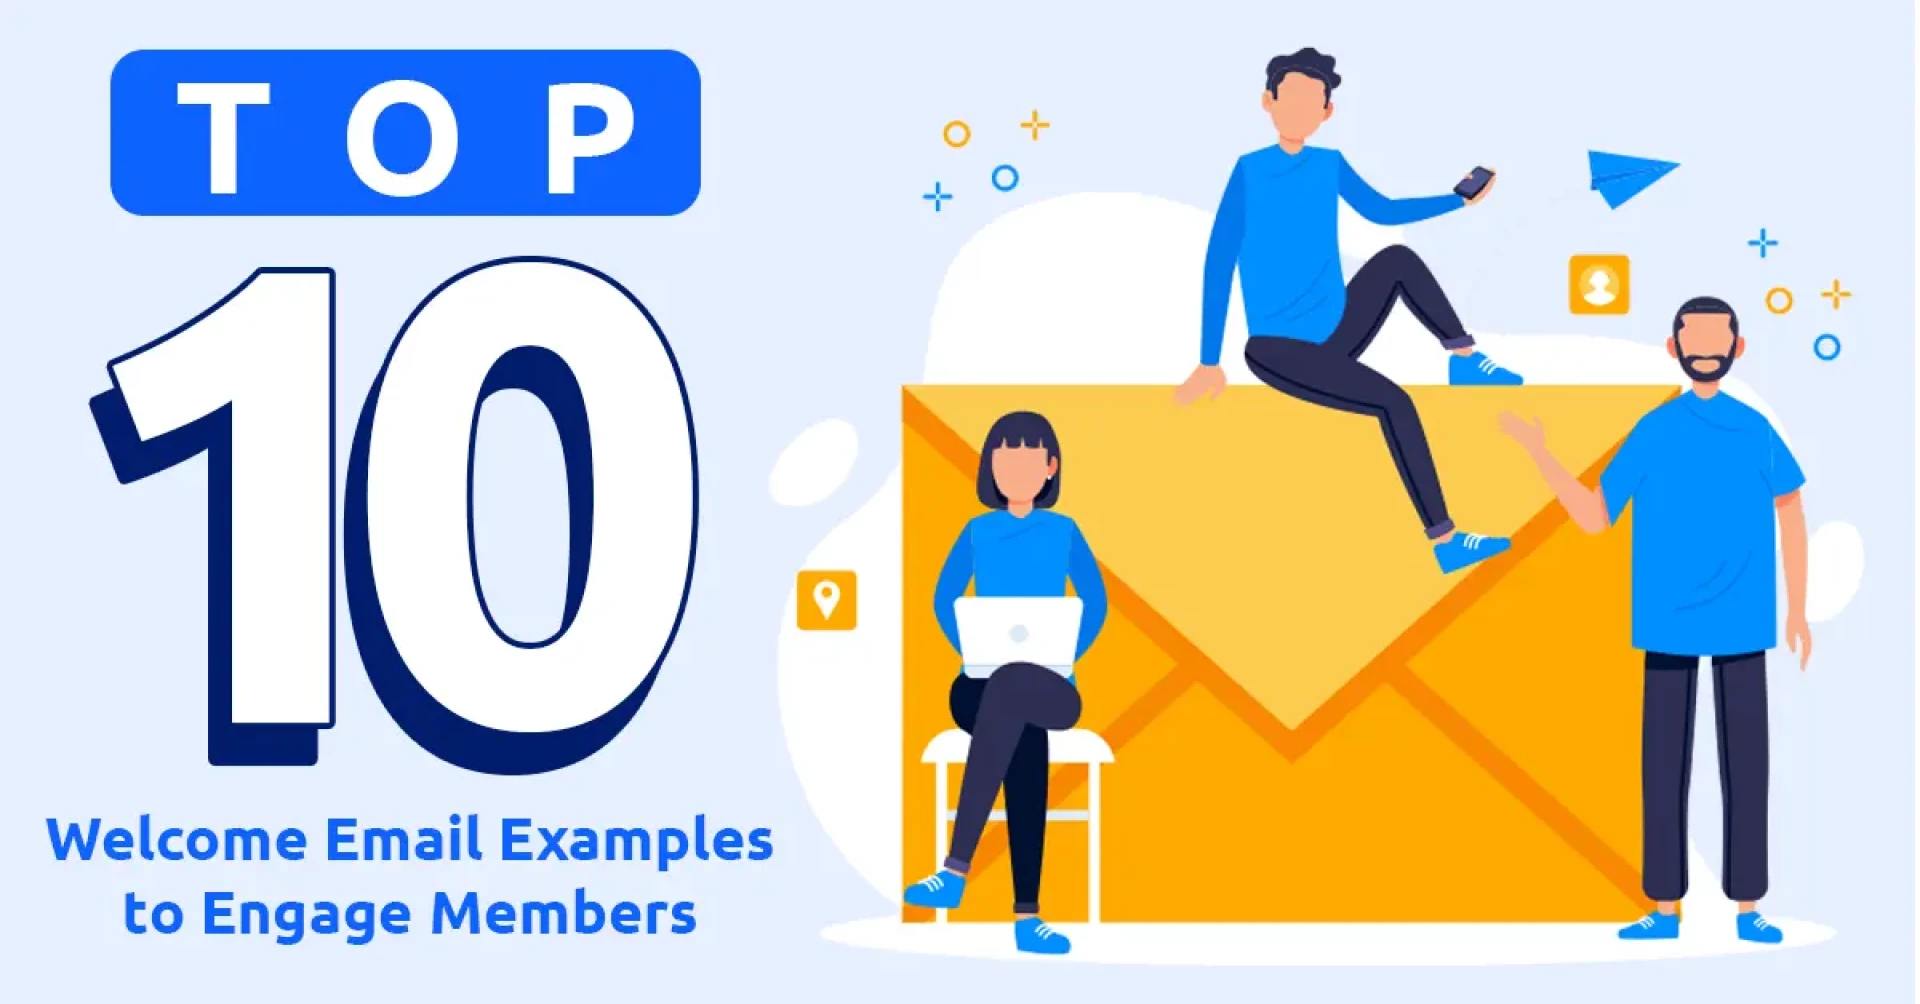 Top 10 Welcome Email Examples to Engage Members